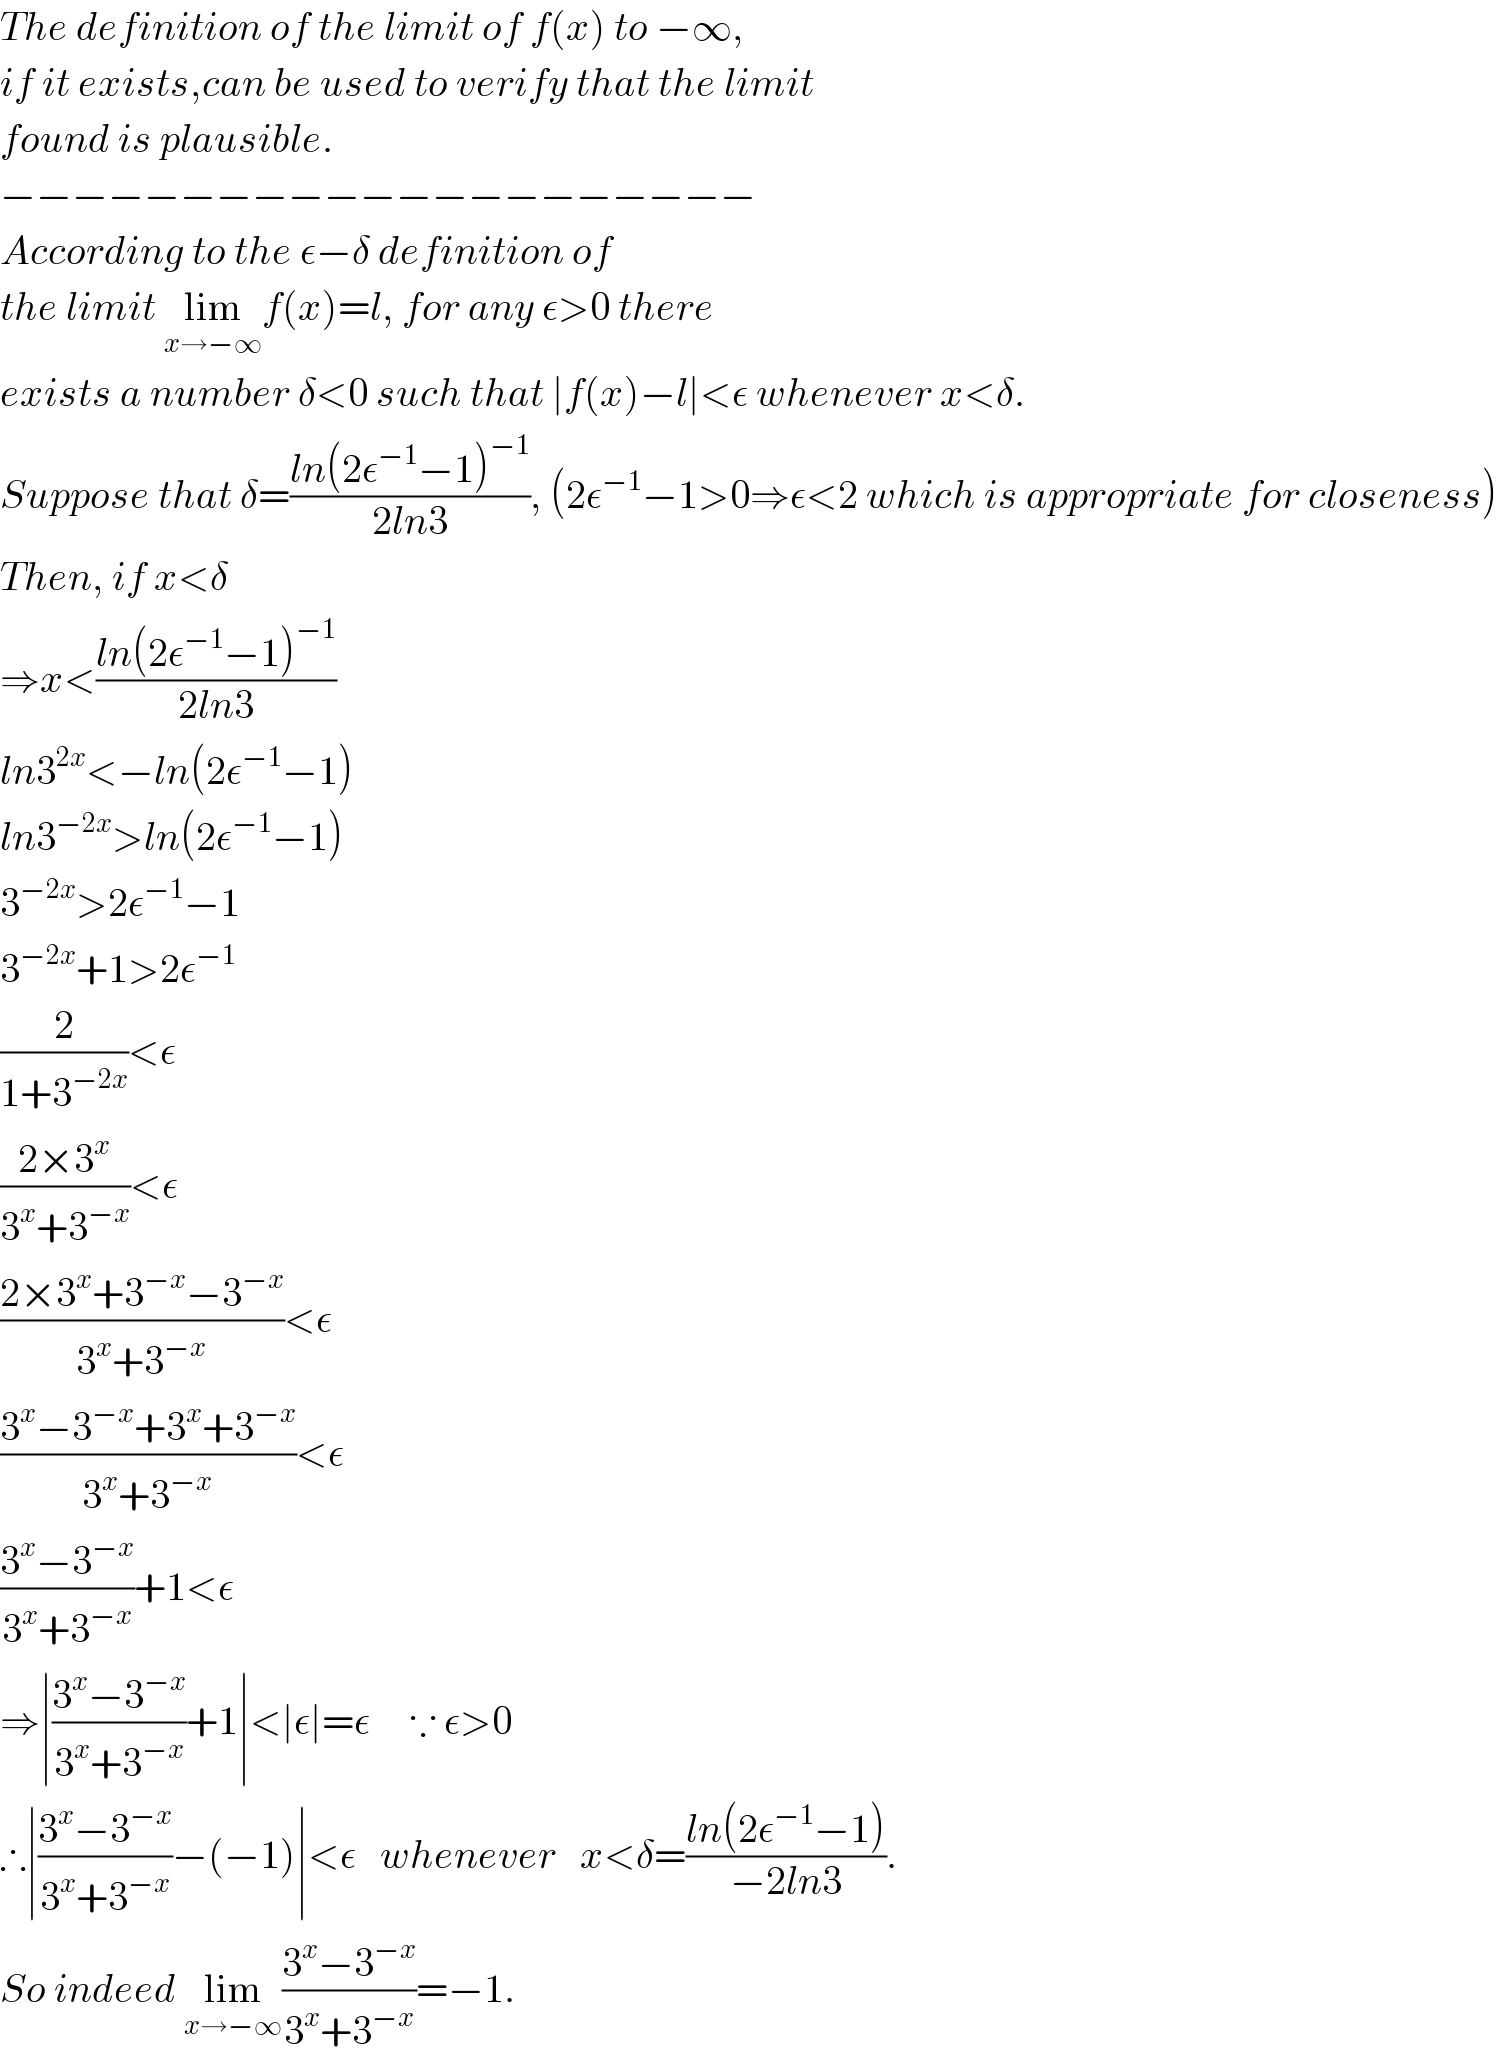 The definition of the limit of f(x) to −∞,  if it exists,can be used to verify that the limit  found is plausible.  −−−−−−−−−−−−−−−−−−−−−  According to the ε−δ definition of  the limit lim_(x→−∞) f(x)=l, for any ε>0 there  exists a number δ<0 such that ∣f(x)−l∣<ε whenever x<δ.  Suppose that δ=((ln(2ε^(−1) −1)^(−1) )/(2ln3)), (2ε^(−1) −1>0⇒ε<2 which is appropriate for closeness)  Then, if x<δ  ⇒x<((ln(2ε^(−1) −1)^(−1) )/(2ln3))  ln3^(2x) <−ln(2ε^(−1) −1)  ln3^(−2x) >ln(2ε^(−1) −1)  3^(−2x) >2ε^(−1) −1  3^(−2x) +1>2ε^(−1)   (2/(1+3^(−2x) ))<ε  ((2×3^x )/(3^x +3^(−x) ))<ε  ((2×3^x +3^(−x) −3^(−x) )/(3^x +3^(−x) ))<ε  ((3^x −3^(−x) +3^x +3^(−x) )/(3^x +3^(−x) ))<ε  ((3^x −3^(−x) )/(3^x +3^(−x) ))+1<ε  ⇒∣((3^x −3^(−x) )/(3^x +3^(−x) ))+1∣<∣ε∣=ε     ∵ ε>0  ∴∣((3^x −3^(−x) )/(3^x +3^(−x) ))−(−1)∣<ε   whenever   x<δ=((ln(2ε^(−1) −1))/(−2ln3)).  So indeed lim_(x→−∞) ((3^x −3^(−x) )/(3^x +3^(−x) ))=−1.  